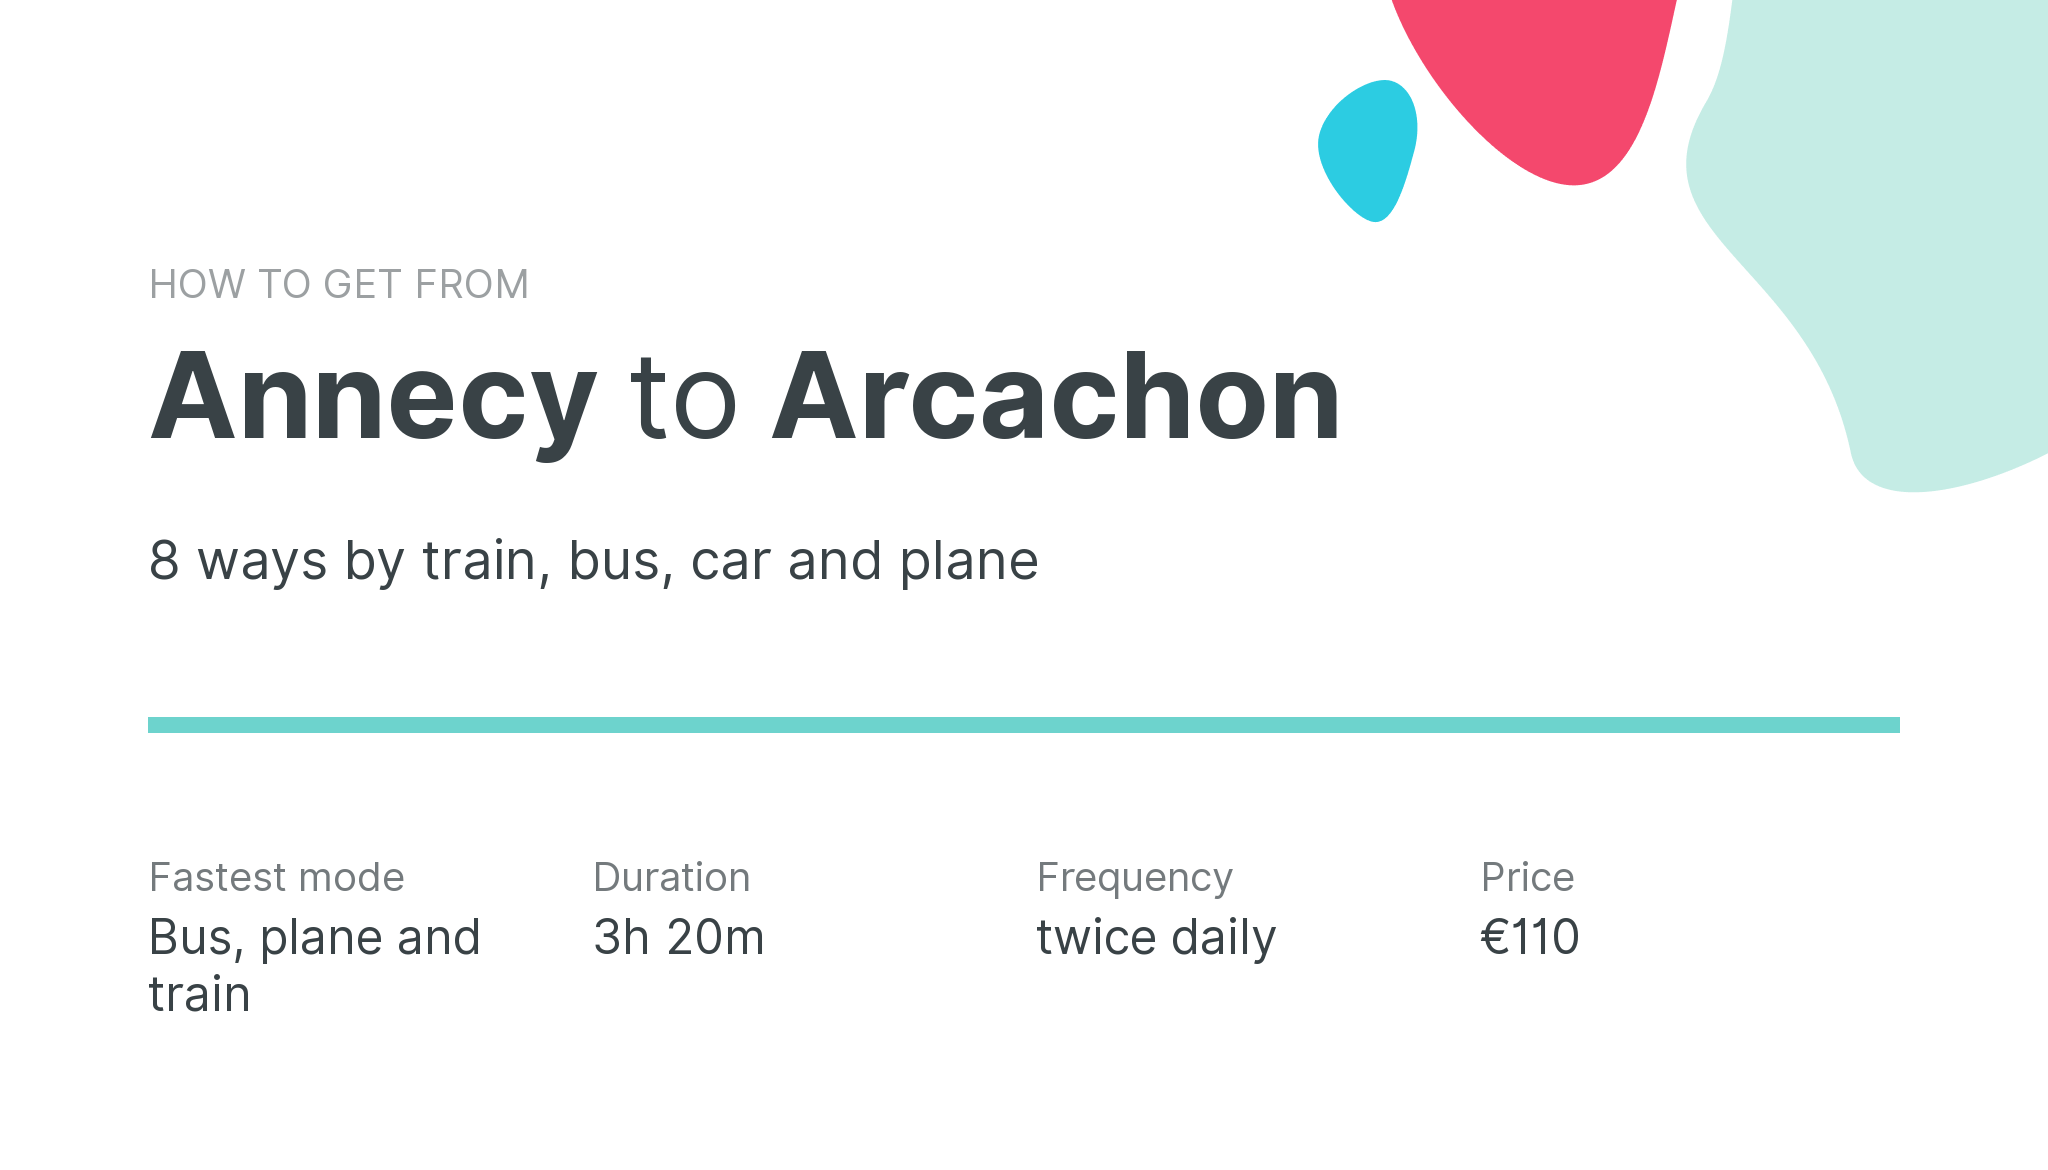 How do I get from Annecy to Arcachon